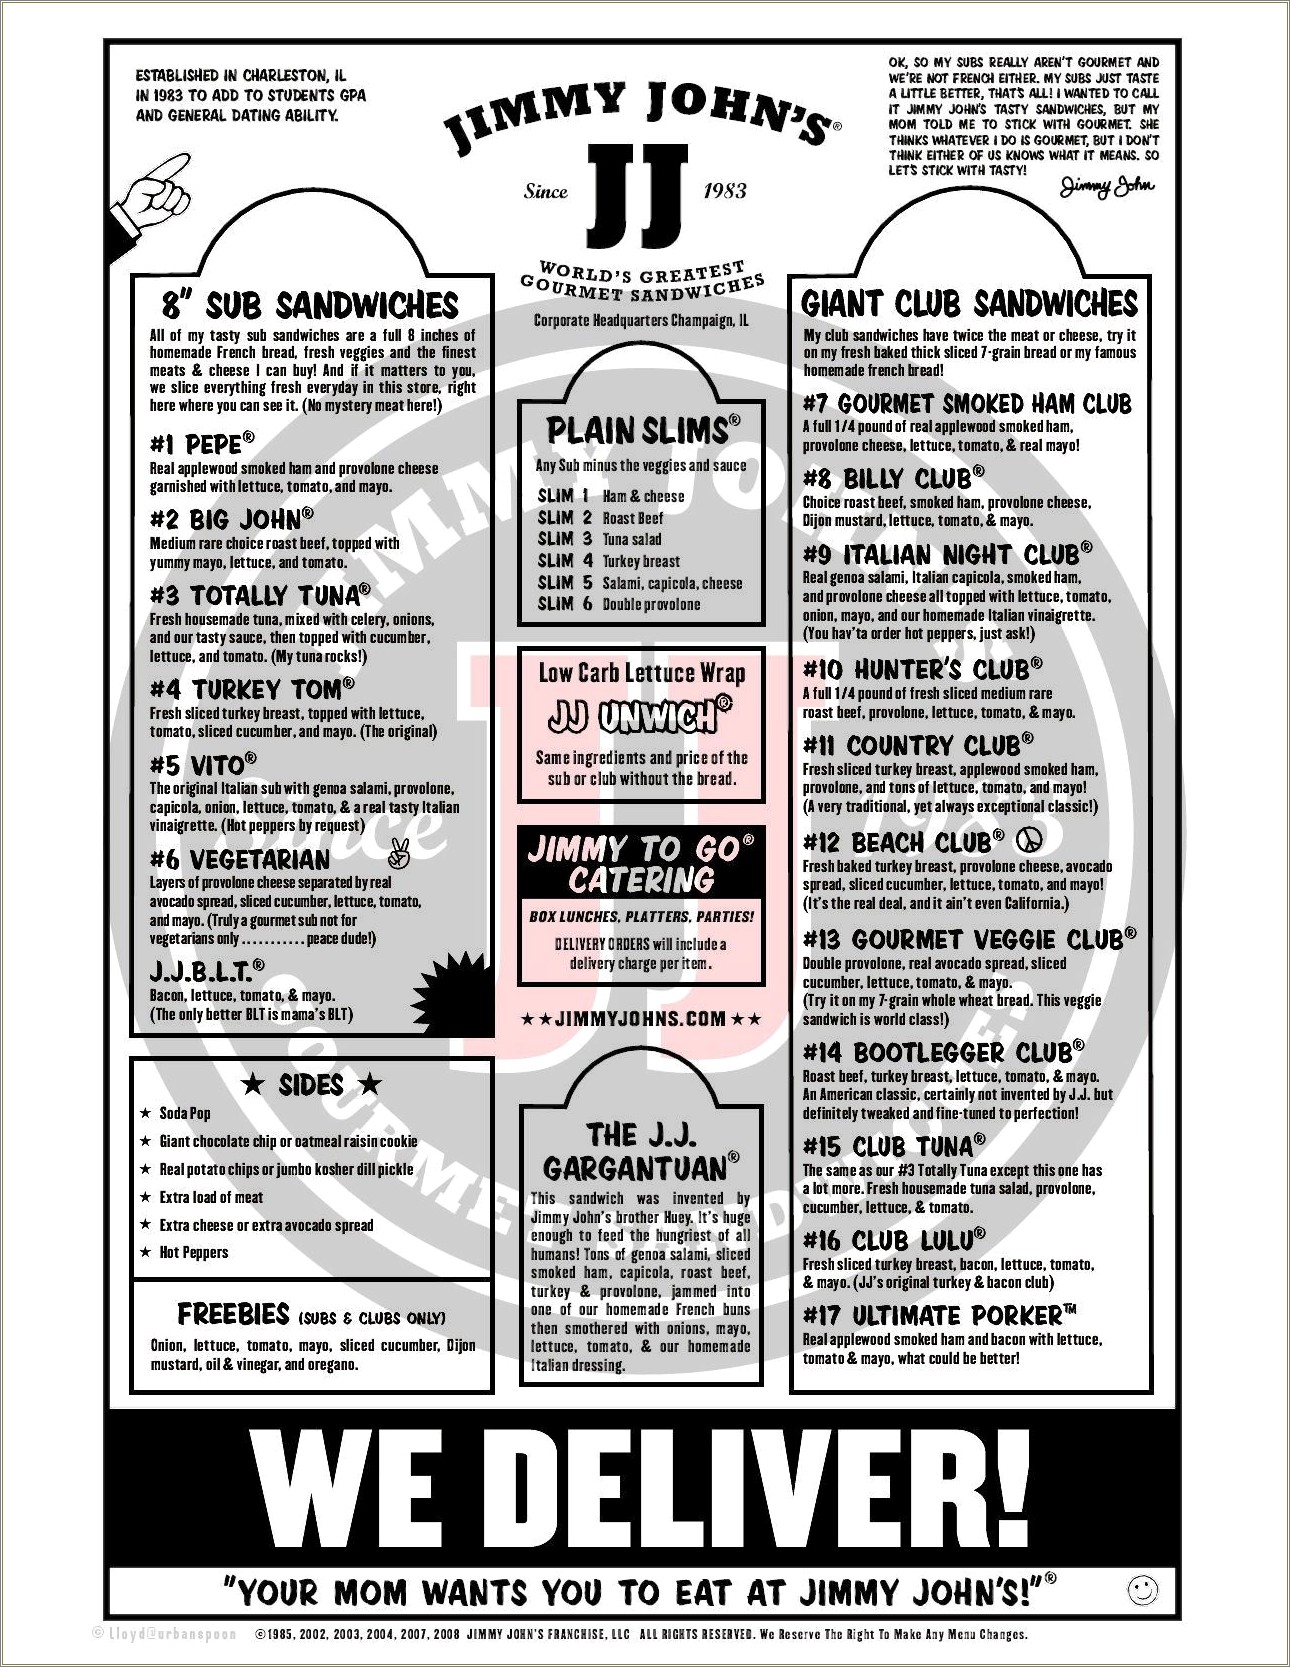 Descriptions For Jimmy Johns Marketing On A Resume